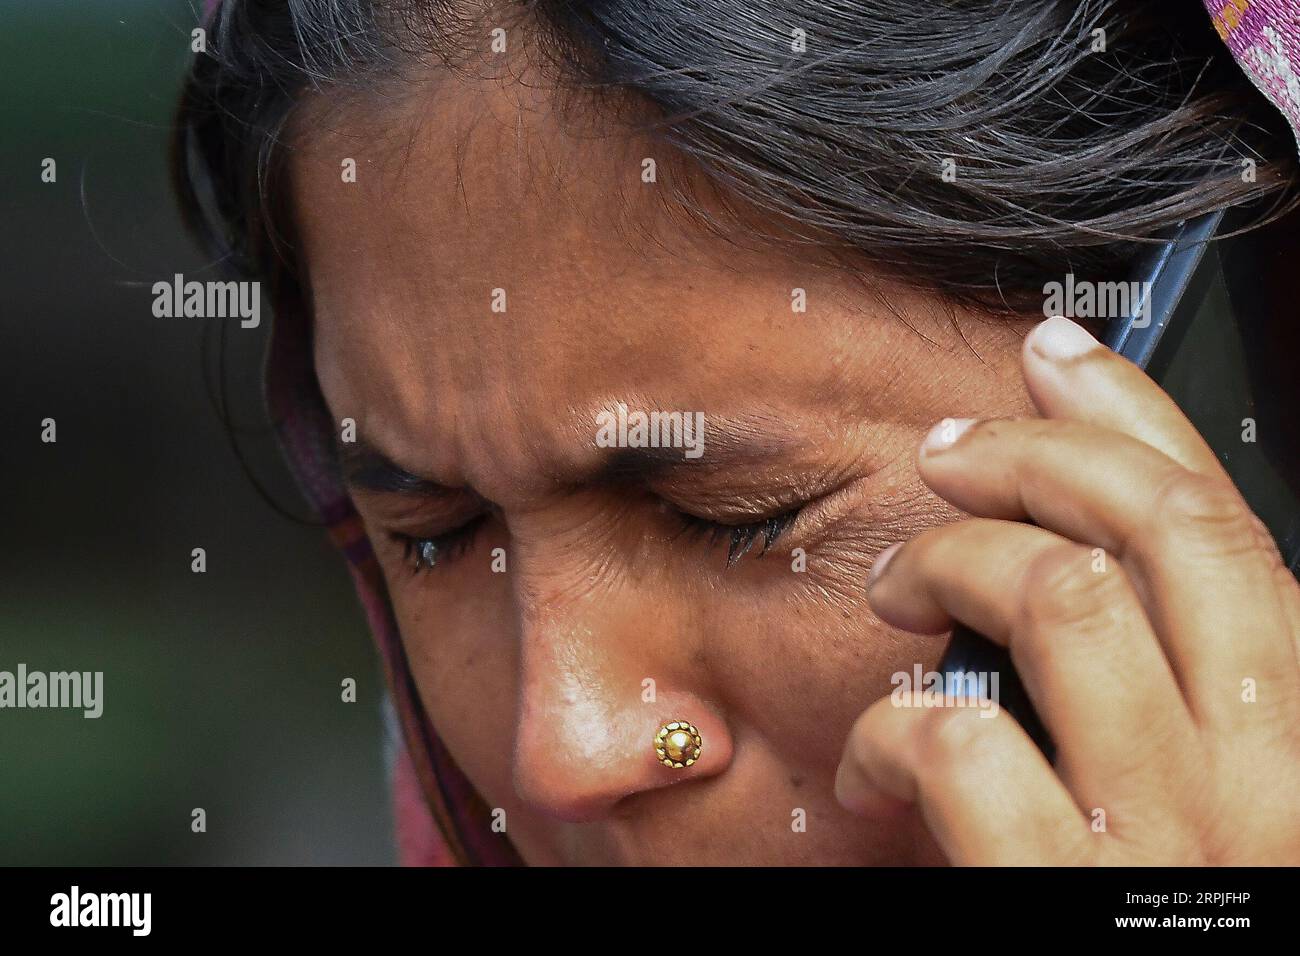 191208 -- NEW DELHI, Dec. 8, 2019 -- A relative of a fire victim speaks on the phone as she waits outside a mortuary in New Delhi, India, Dec. 8, 2019. At least 43 people died and more than 50 injured in the fire incident. The injured are undergoing medical treatment at four different hospitals. The fire broke out in north Delhi s Filmistan area in the early hours of Sunday when more than 100 people, mostly labourers, were asleep inside a four-storey building. Str/Xinhua INDIA-NEW DELHI-FIRE VICTIMS-RELATIVES Stringer PUBLICATIONxNOTxINxCHN Stock Photo